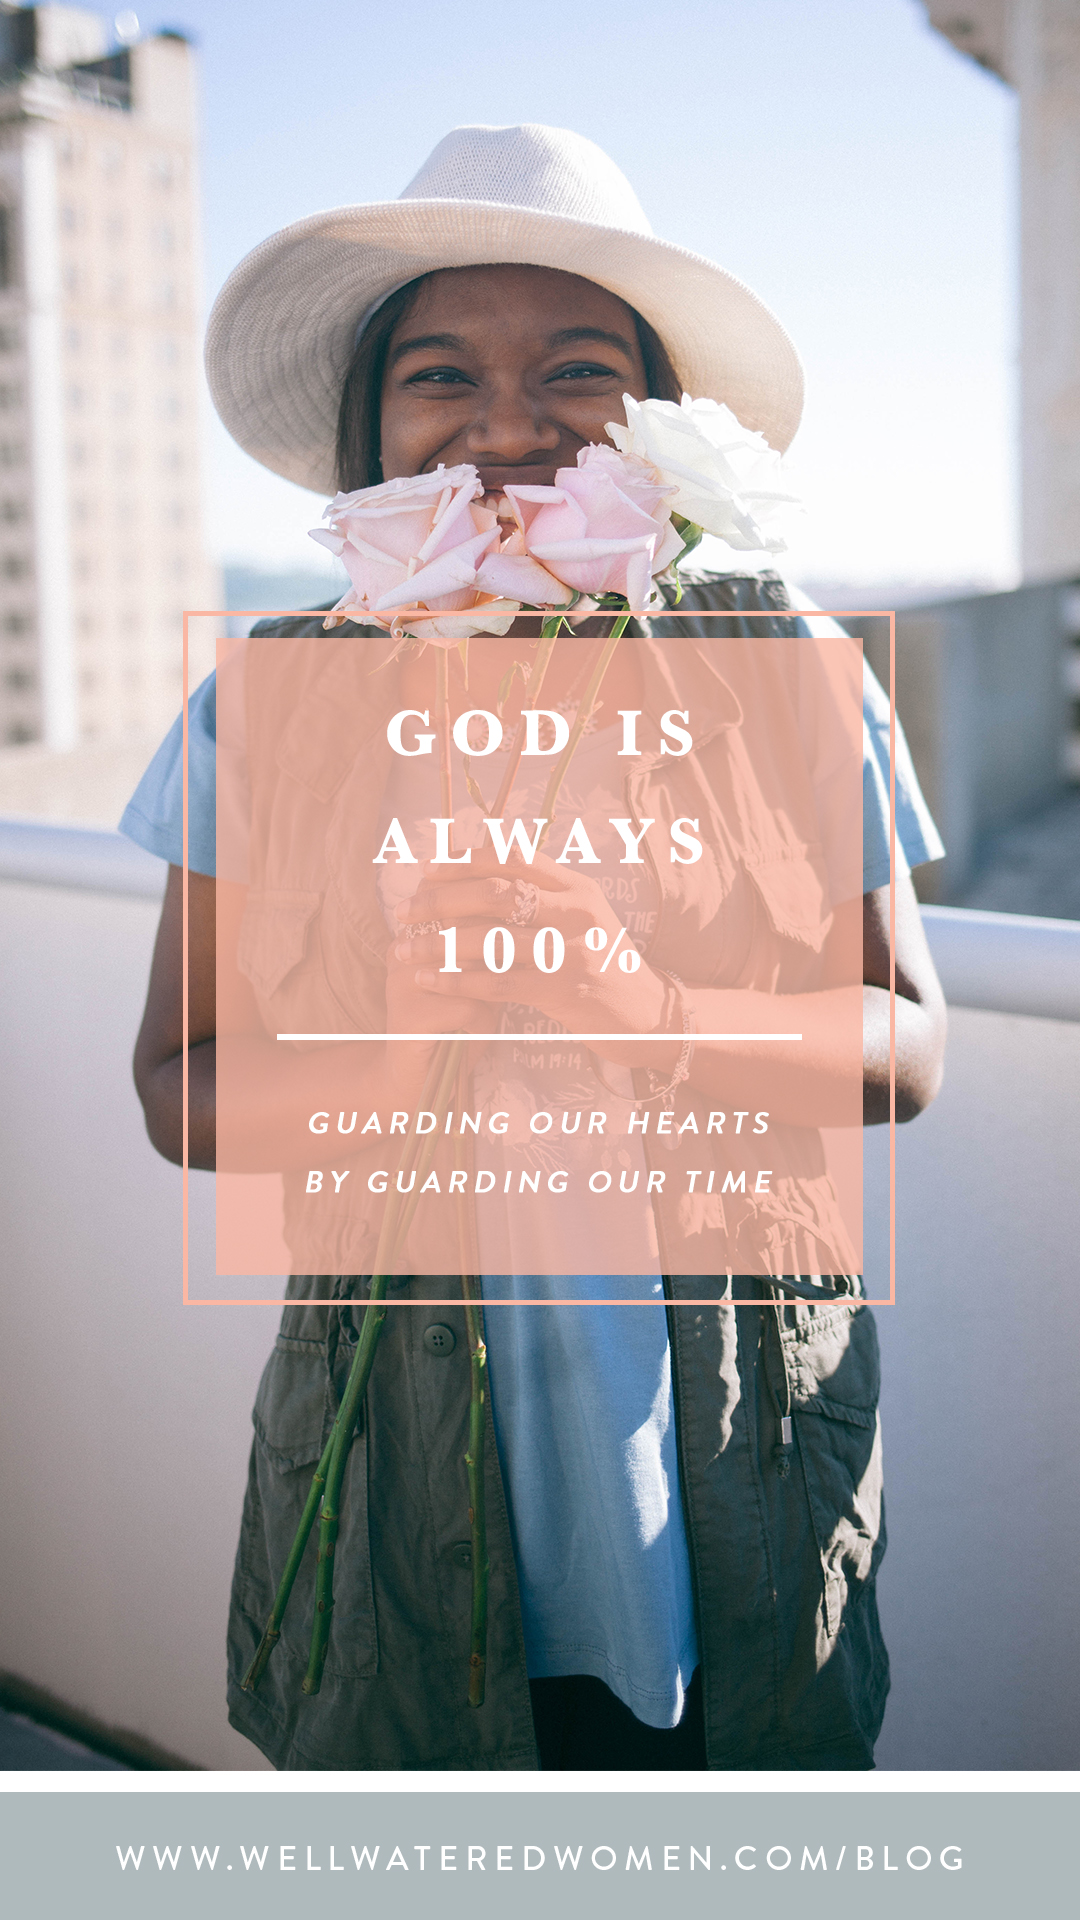 God is ALWAYS 100%: Guarding our hearts by guarding our time - Blog by Well-Watered Women